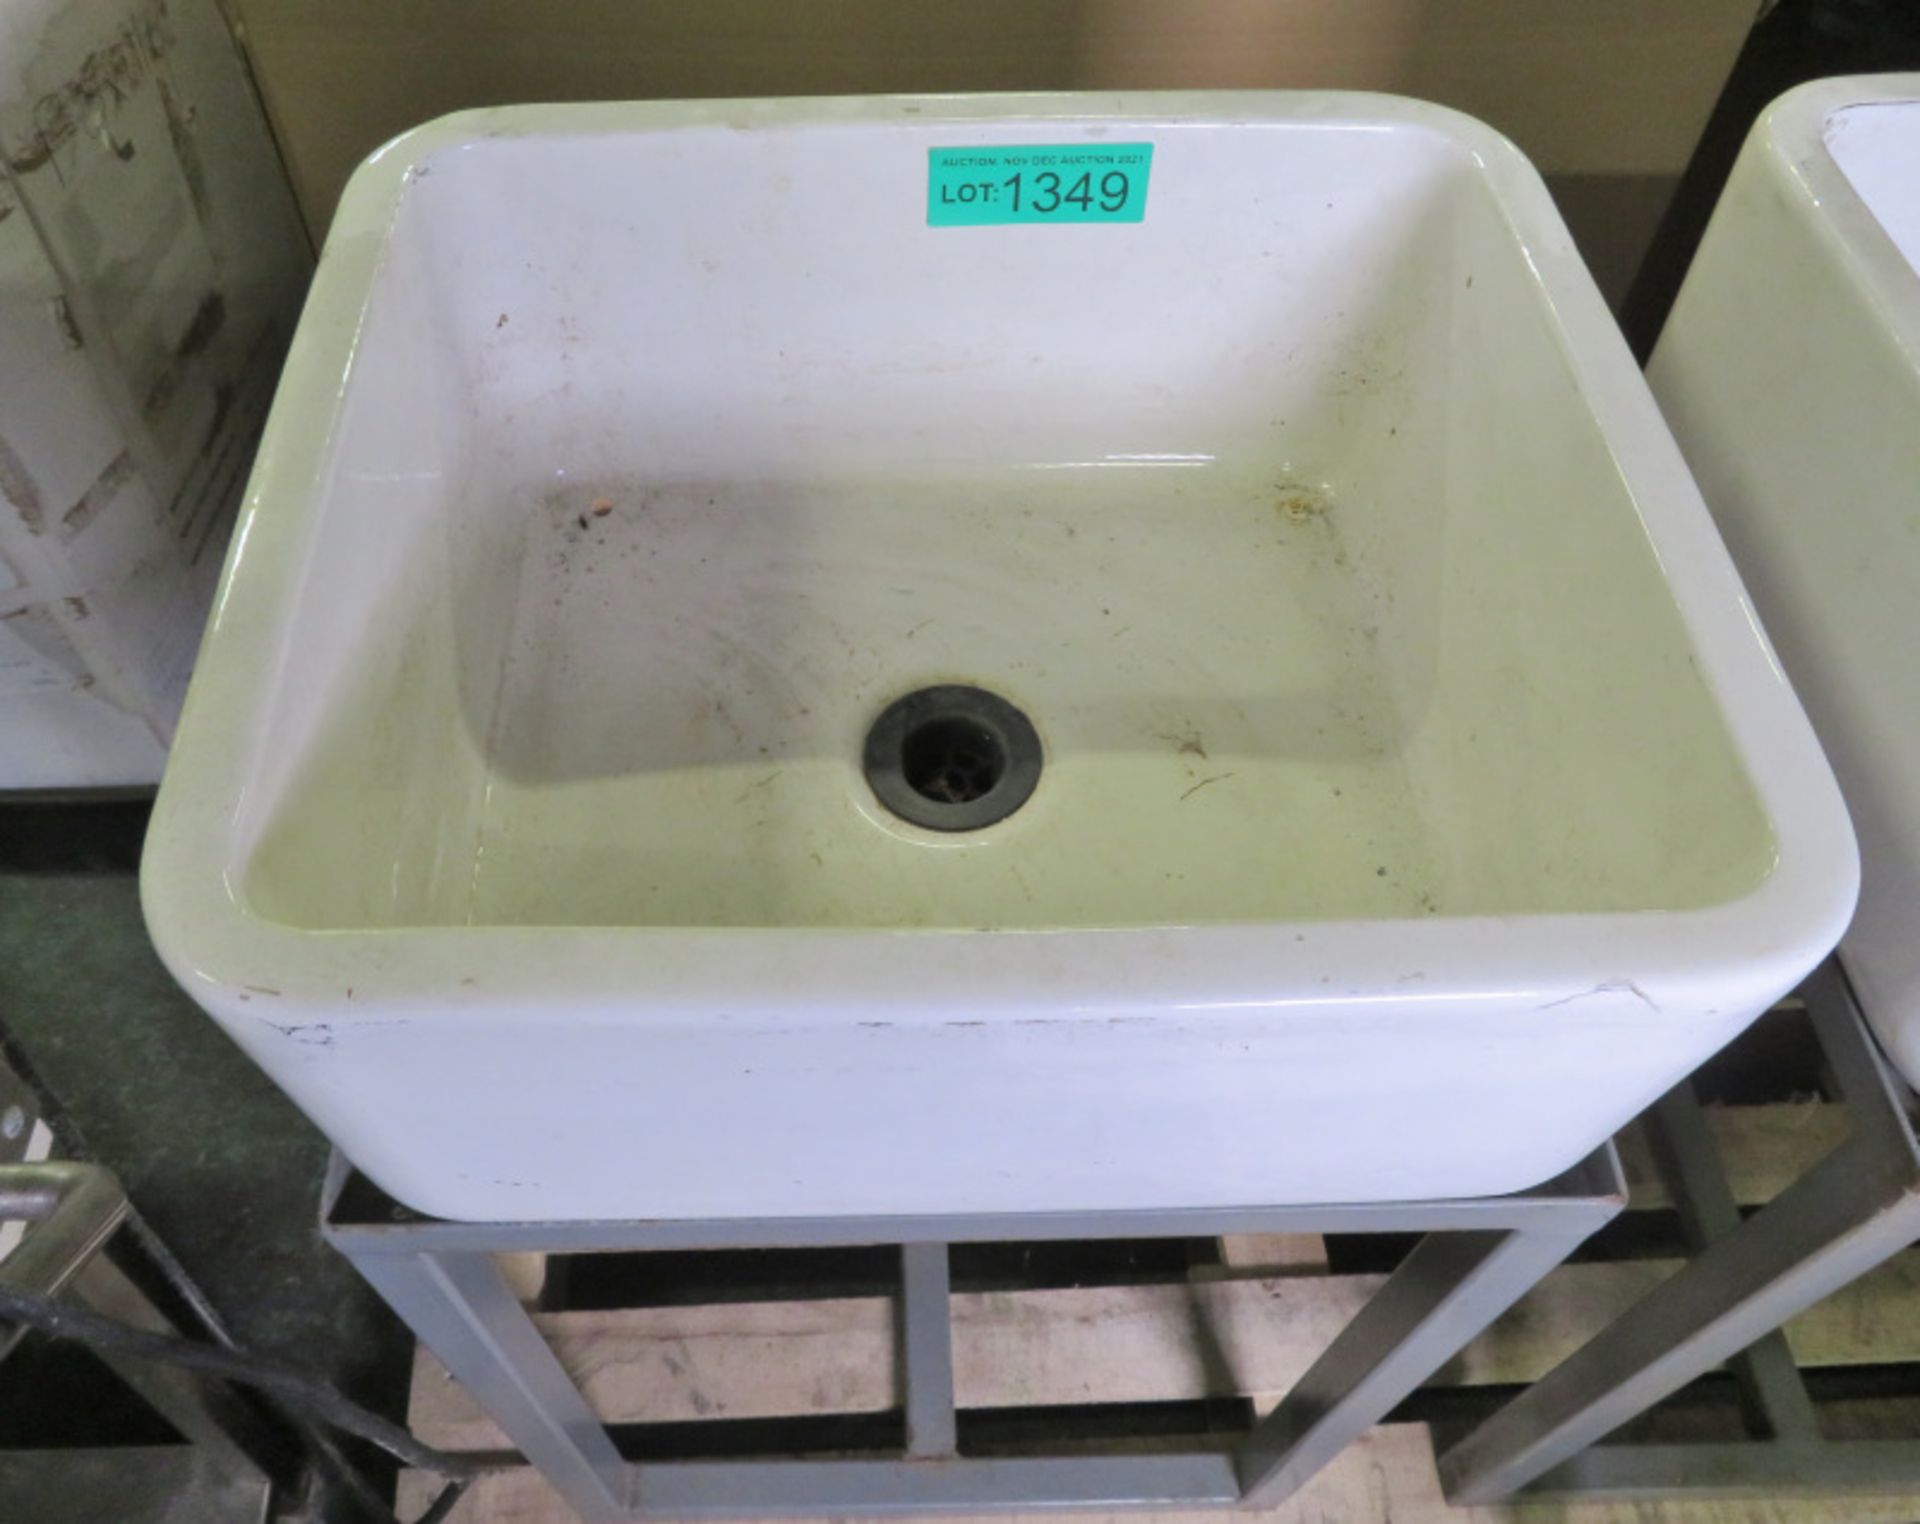 Ceramic Sink On A Metal Stand L 460mm x W 400mm x H 750mm - Image 2 of 3